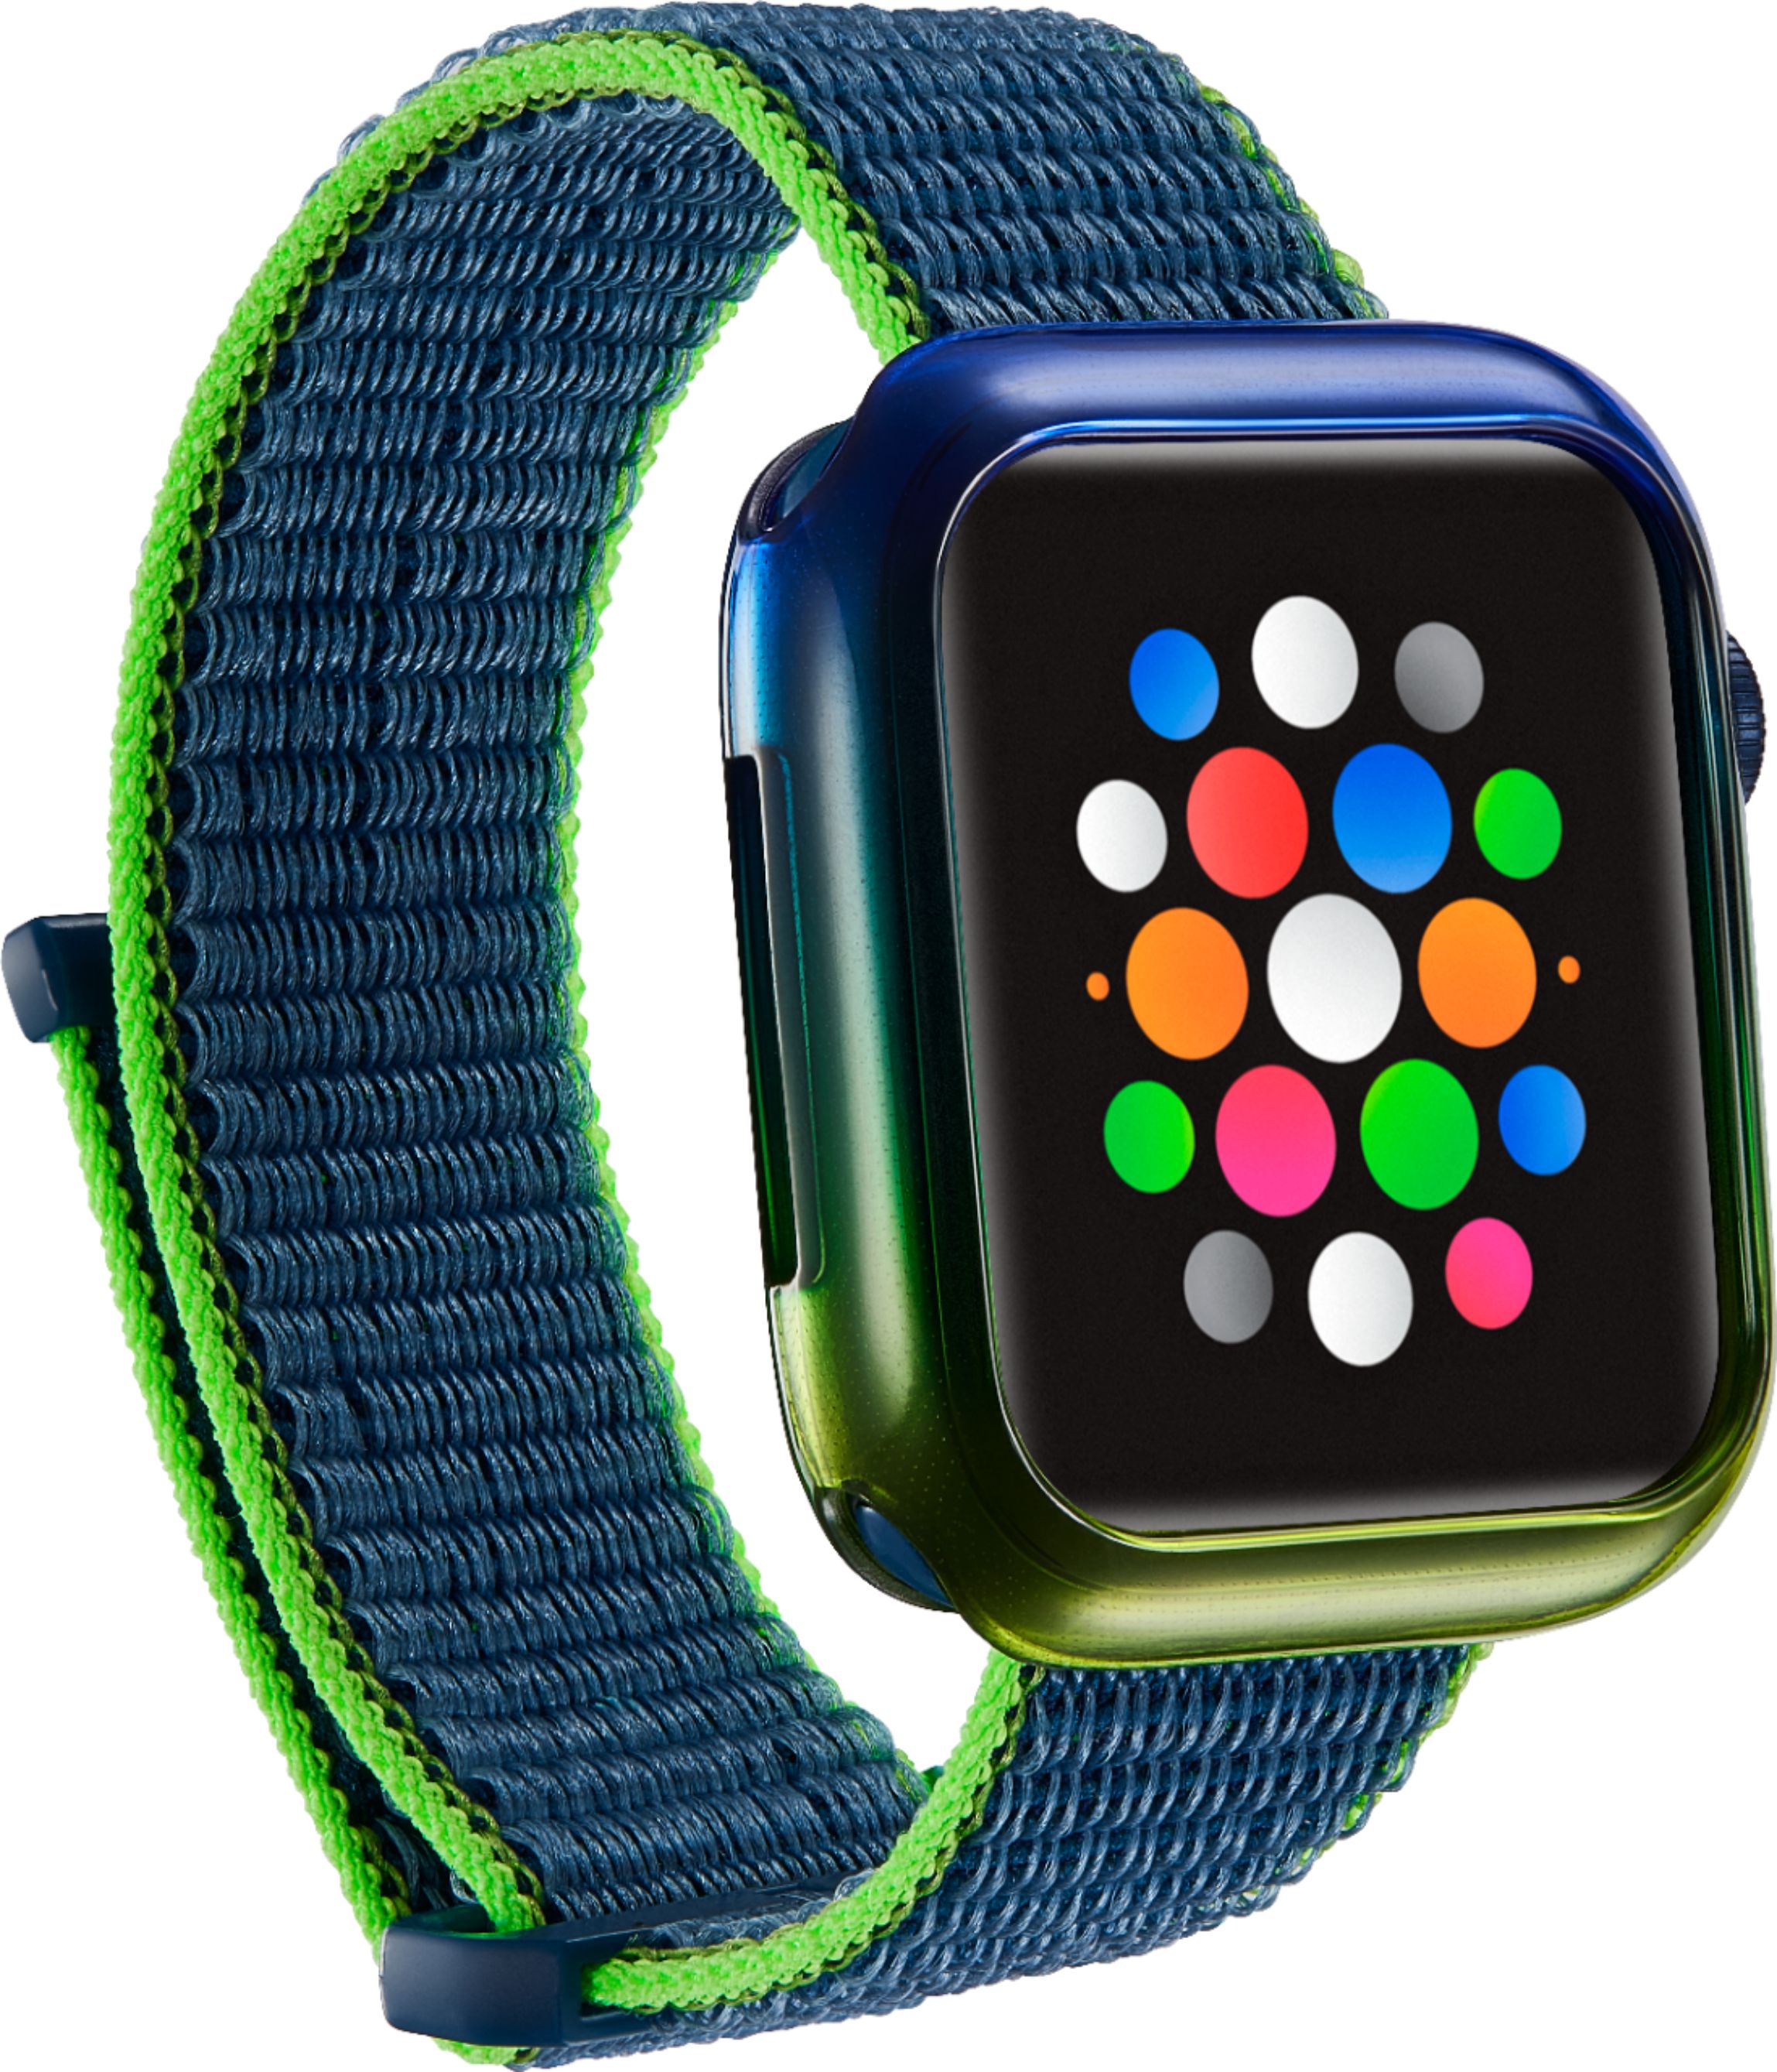 Angle View: Modal™ - Nylon Watch Band and Bumper Case For Apple Watch 40mm Series 4,5,6 and Apple Watch SE - Blue